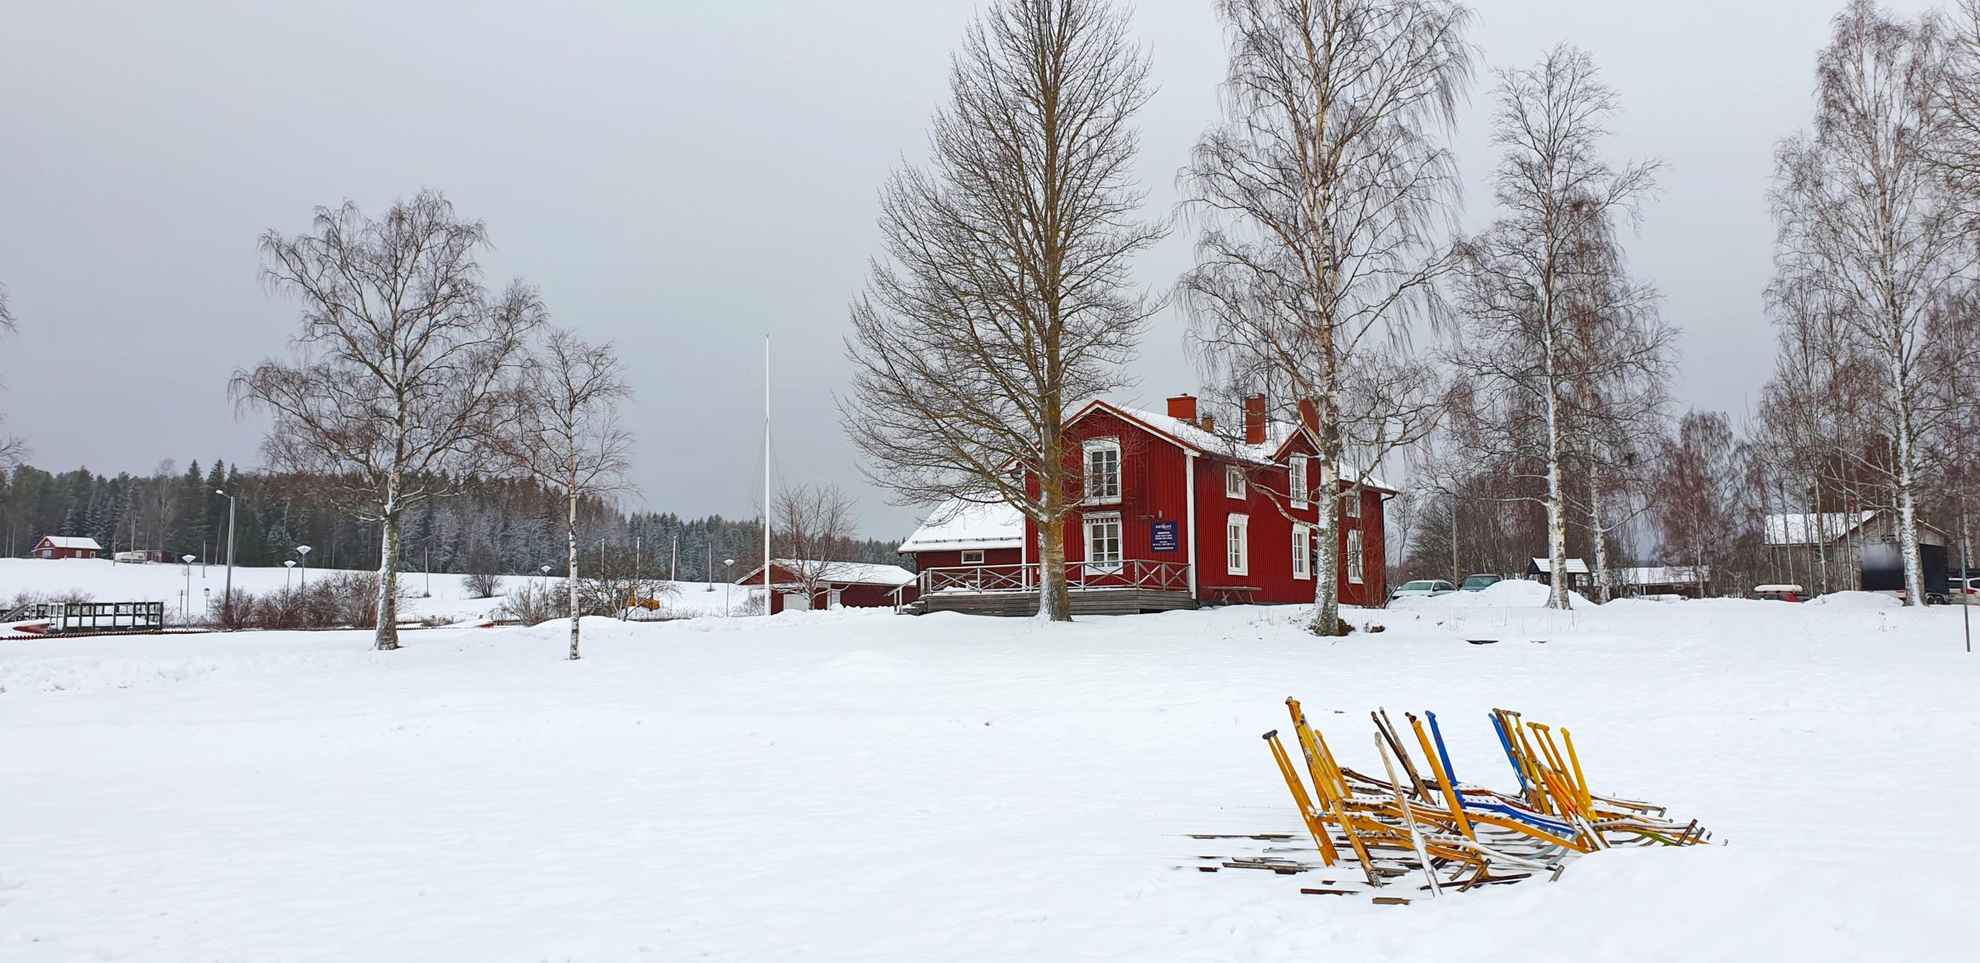 A red house during winter. In front of the house is a set of kick-sleds.